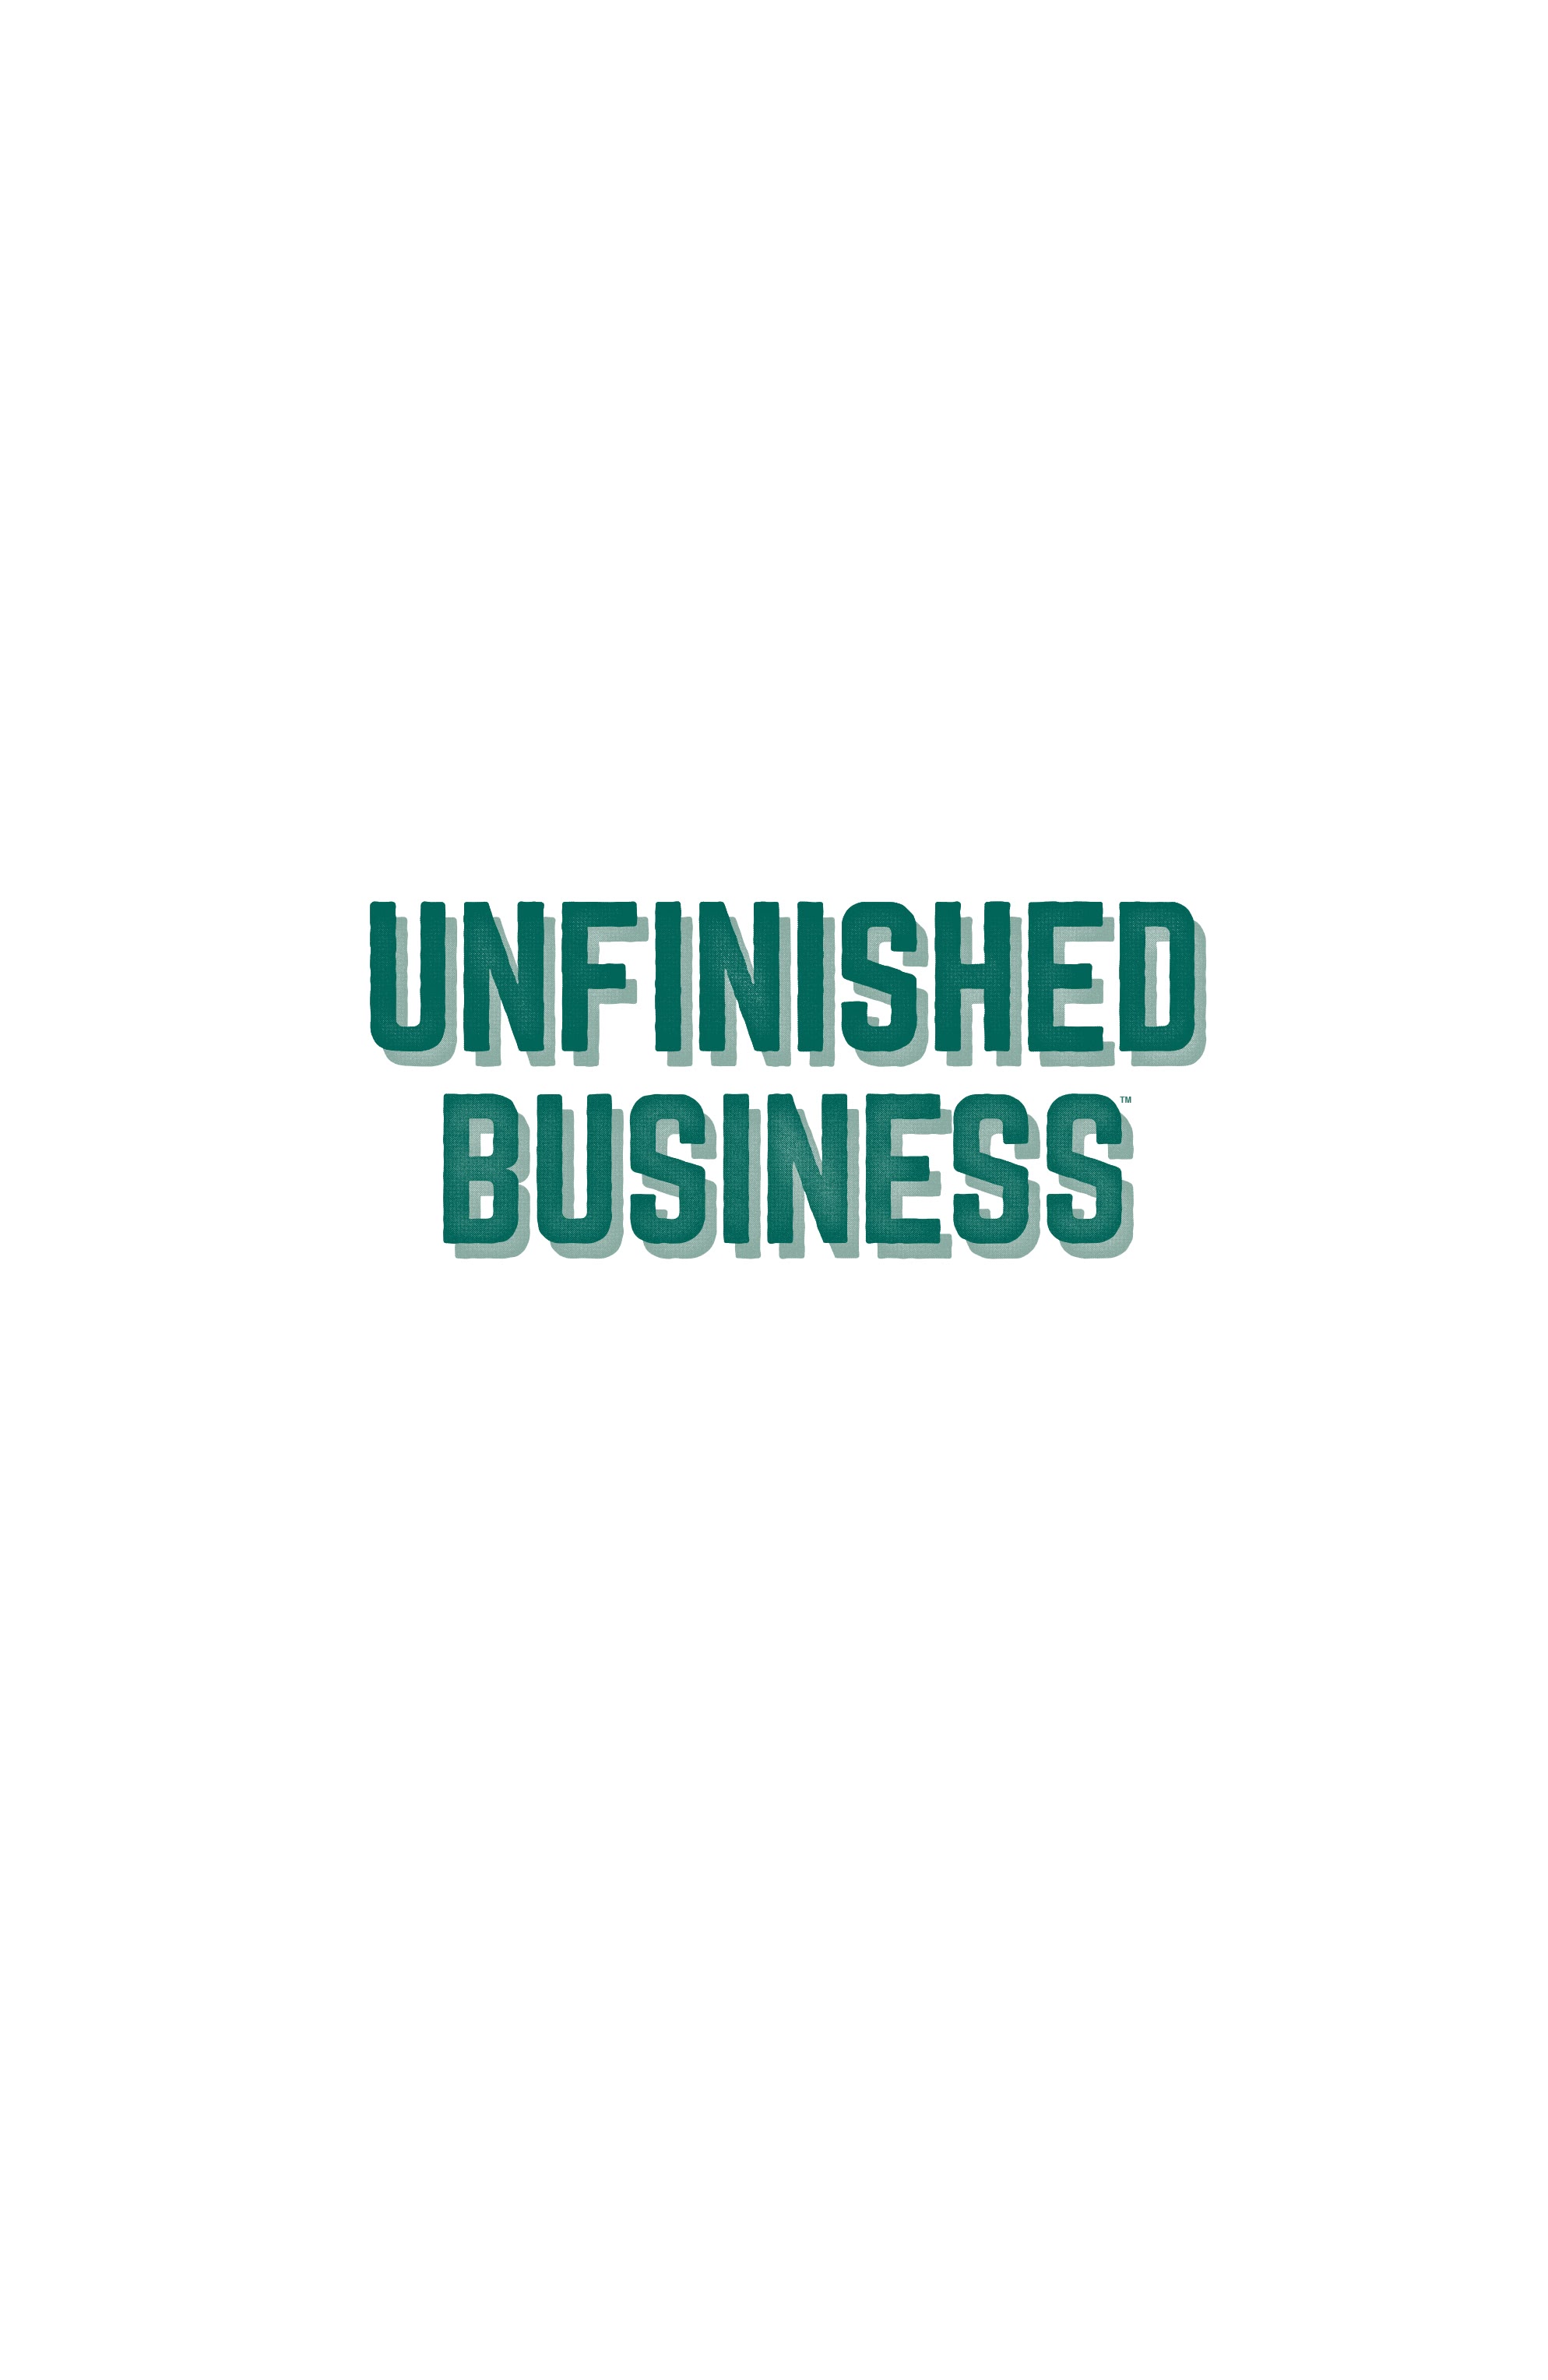 Read online Unfinished Business comic -  Issue # TPB - 2